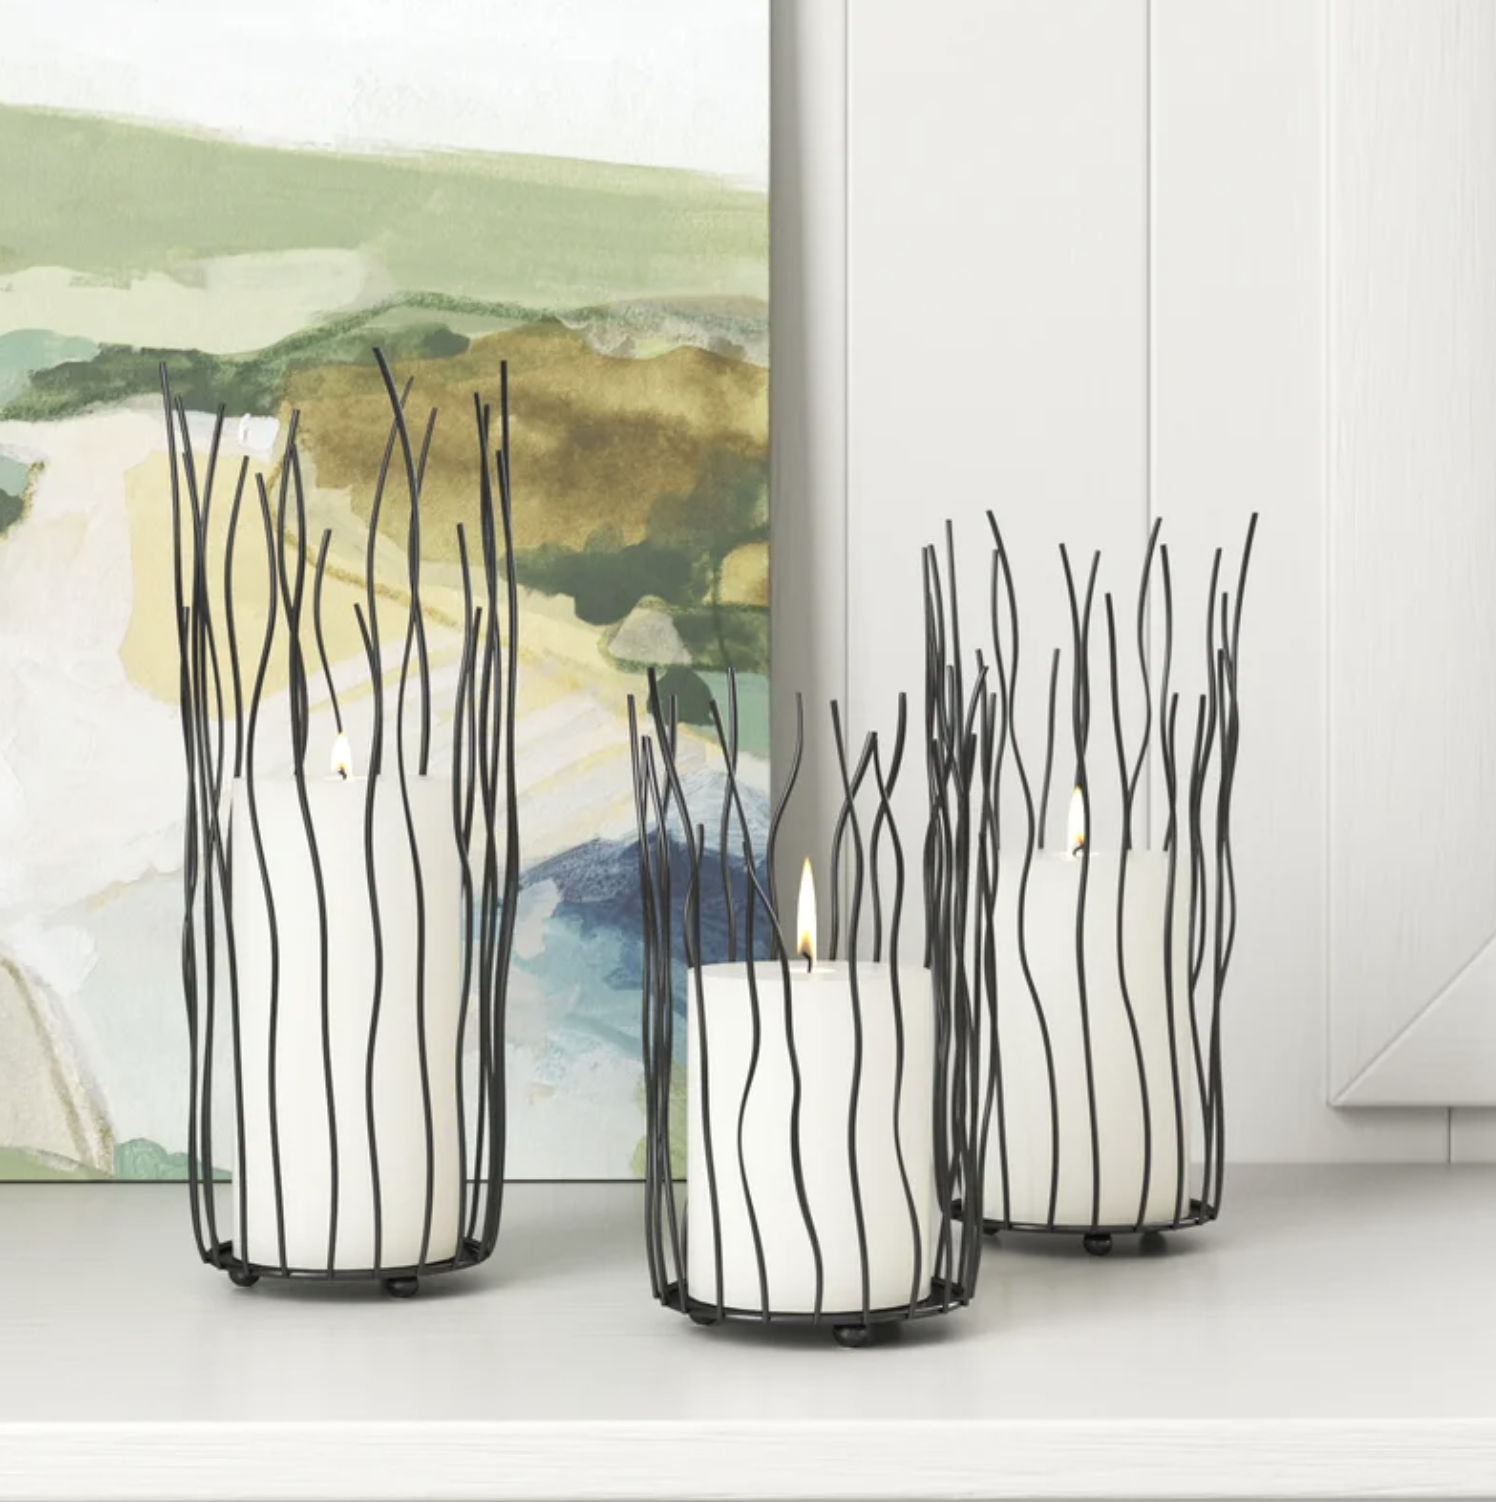 the three wire framed candle holders